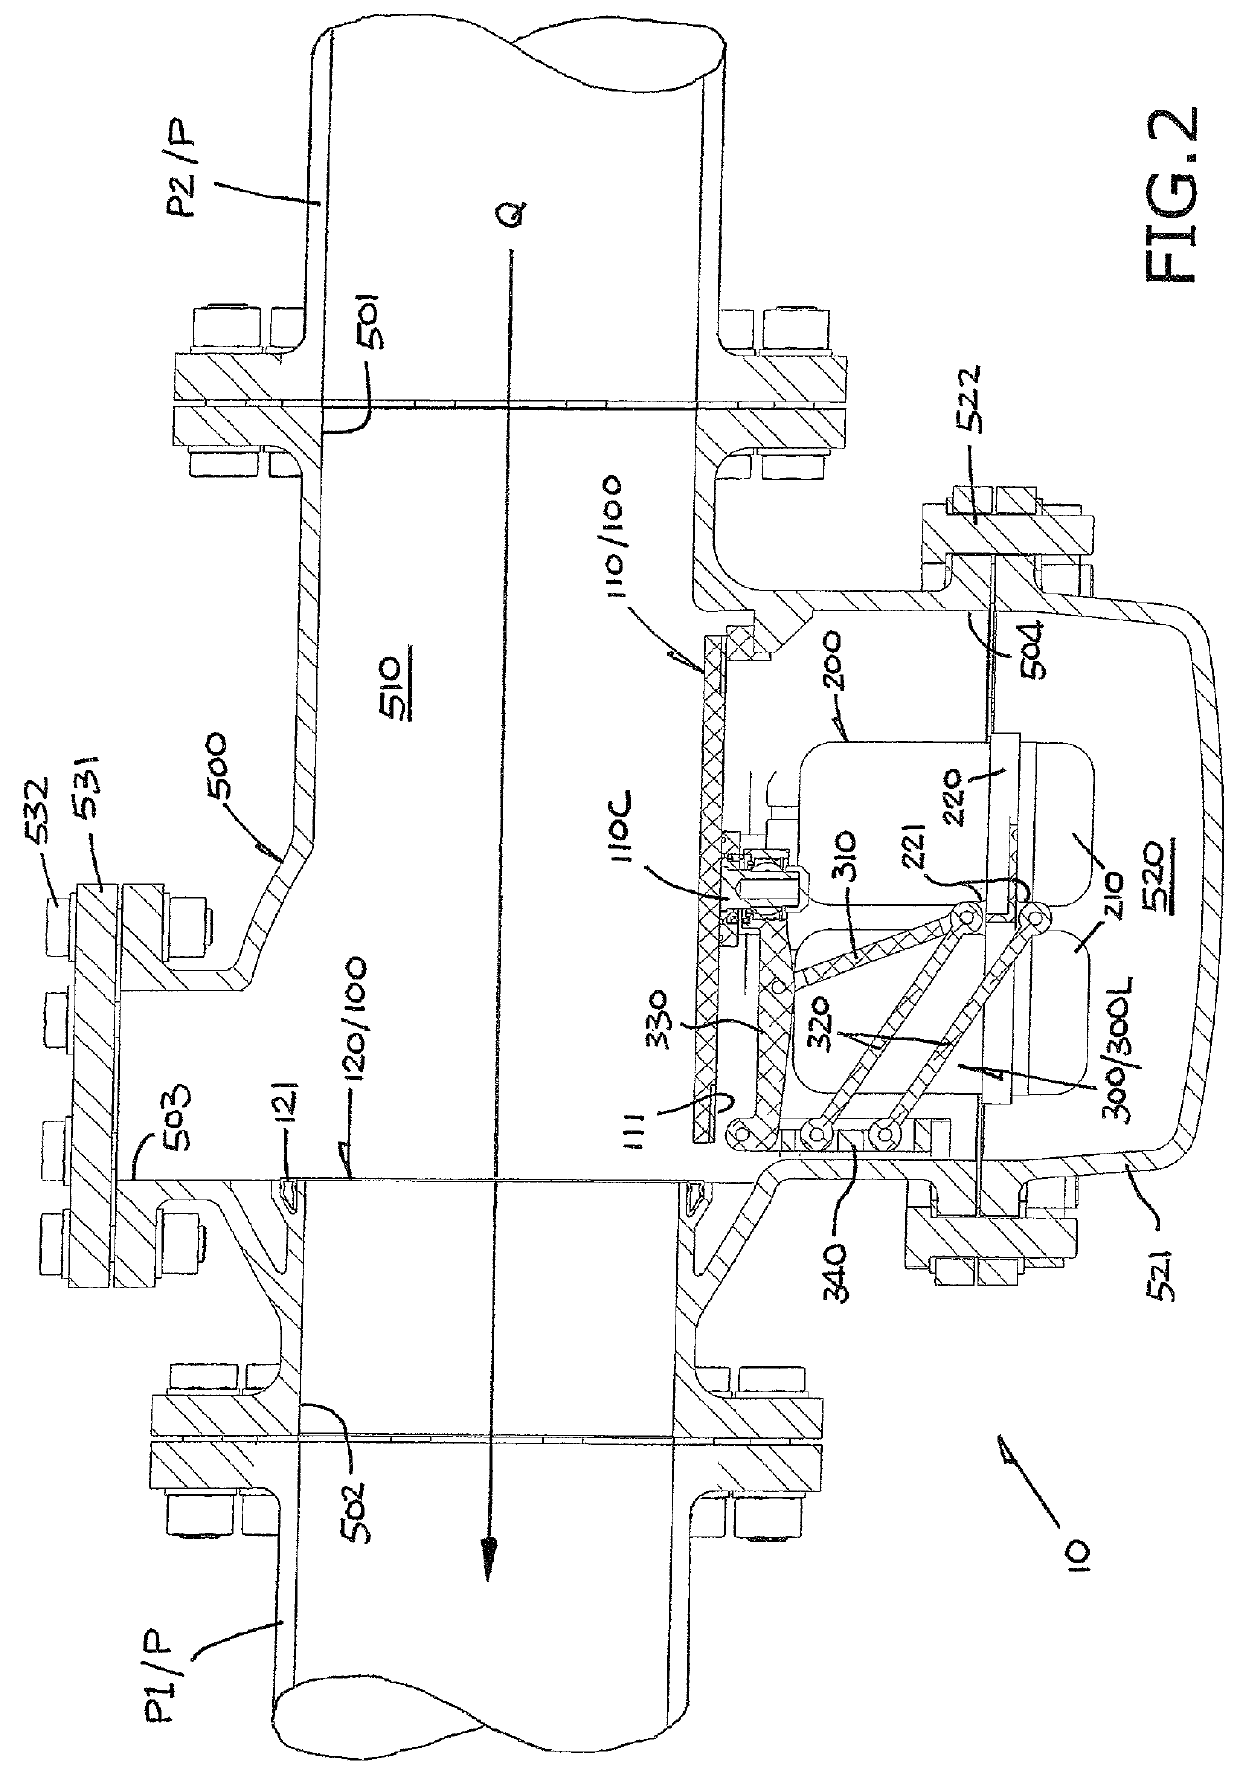 Shut-off device for pipe